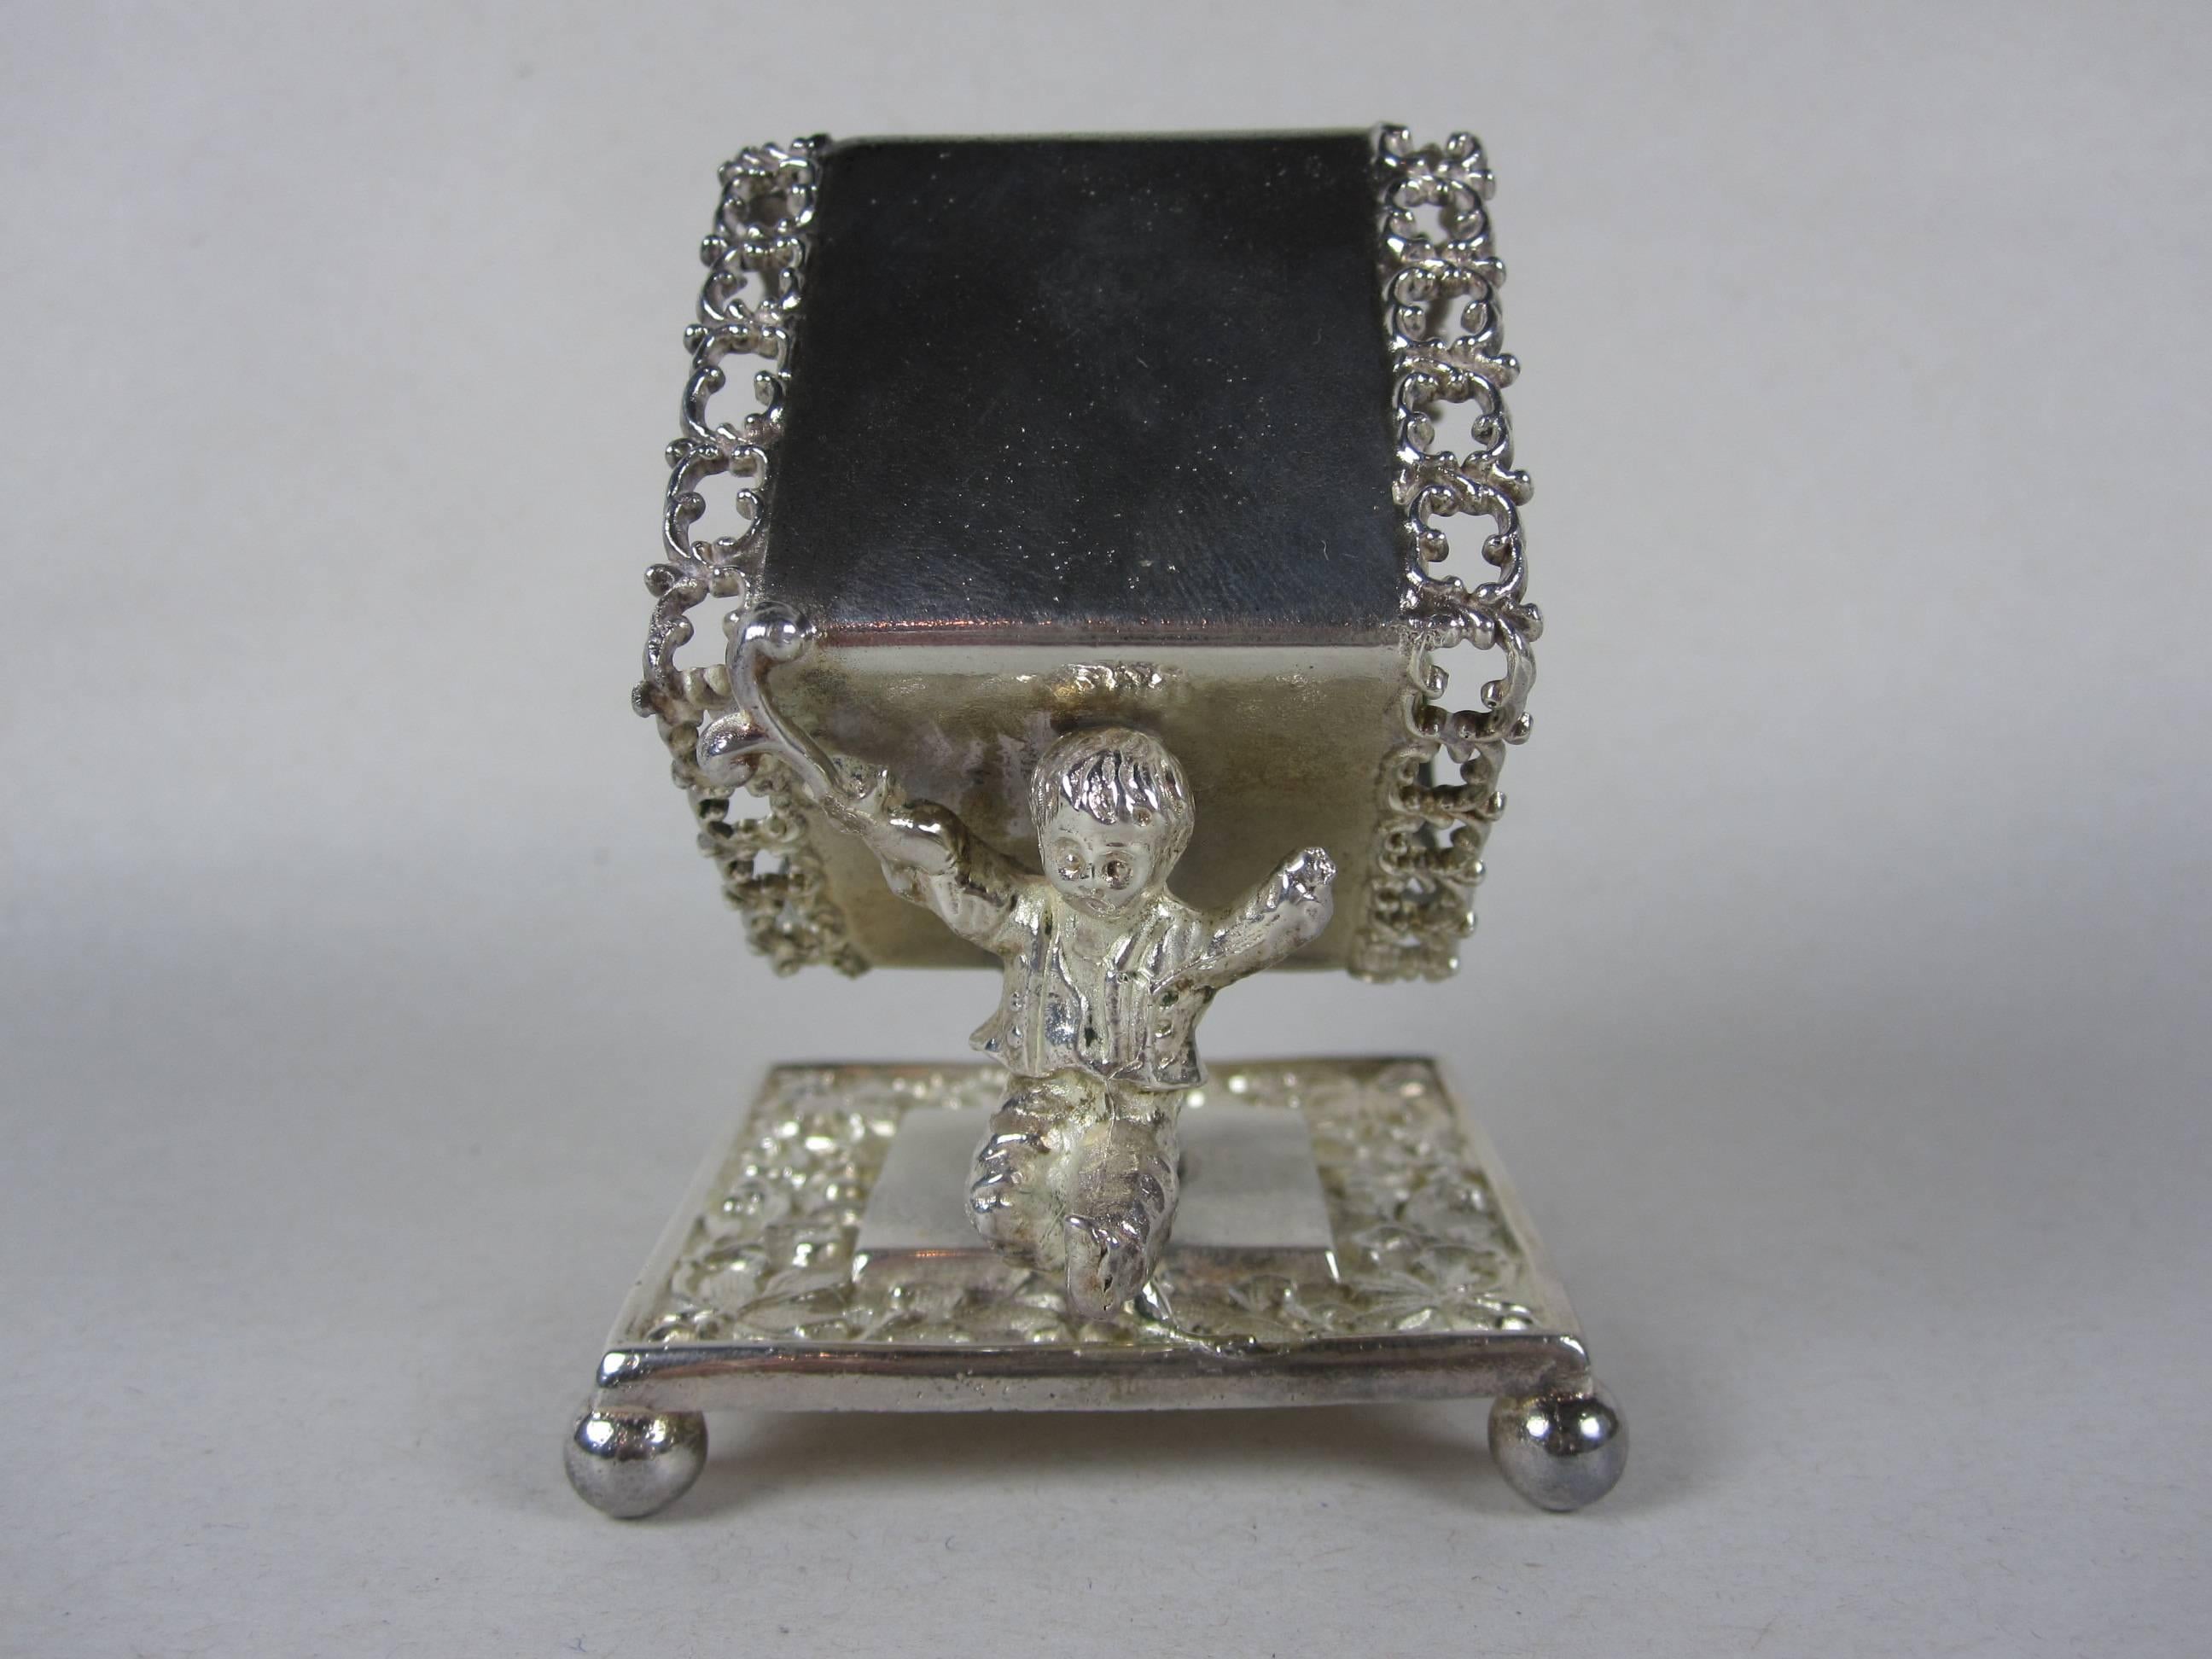 An antique Victorian era silver plate standing napkin ring, place holder showing a young boy supporting a scrolled rim square shaped ring on a chased base with four ball feet,

circa 1890–1910, marked Meriden Britannia Company.

Very good, light